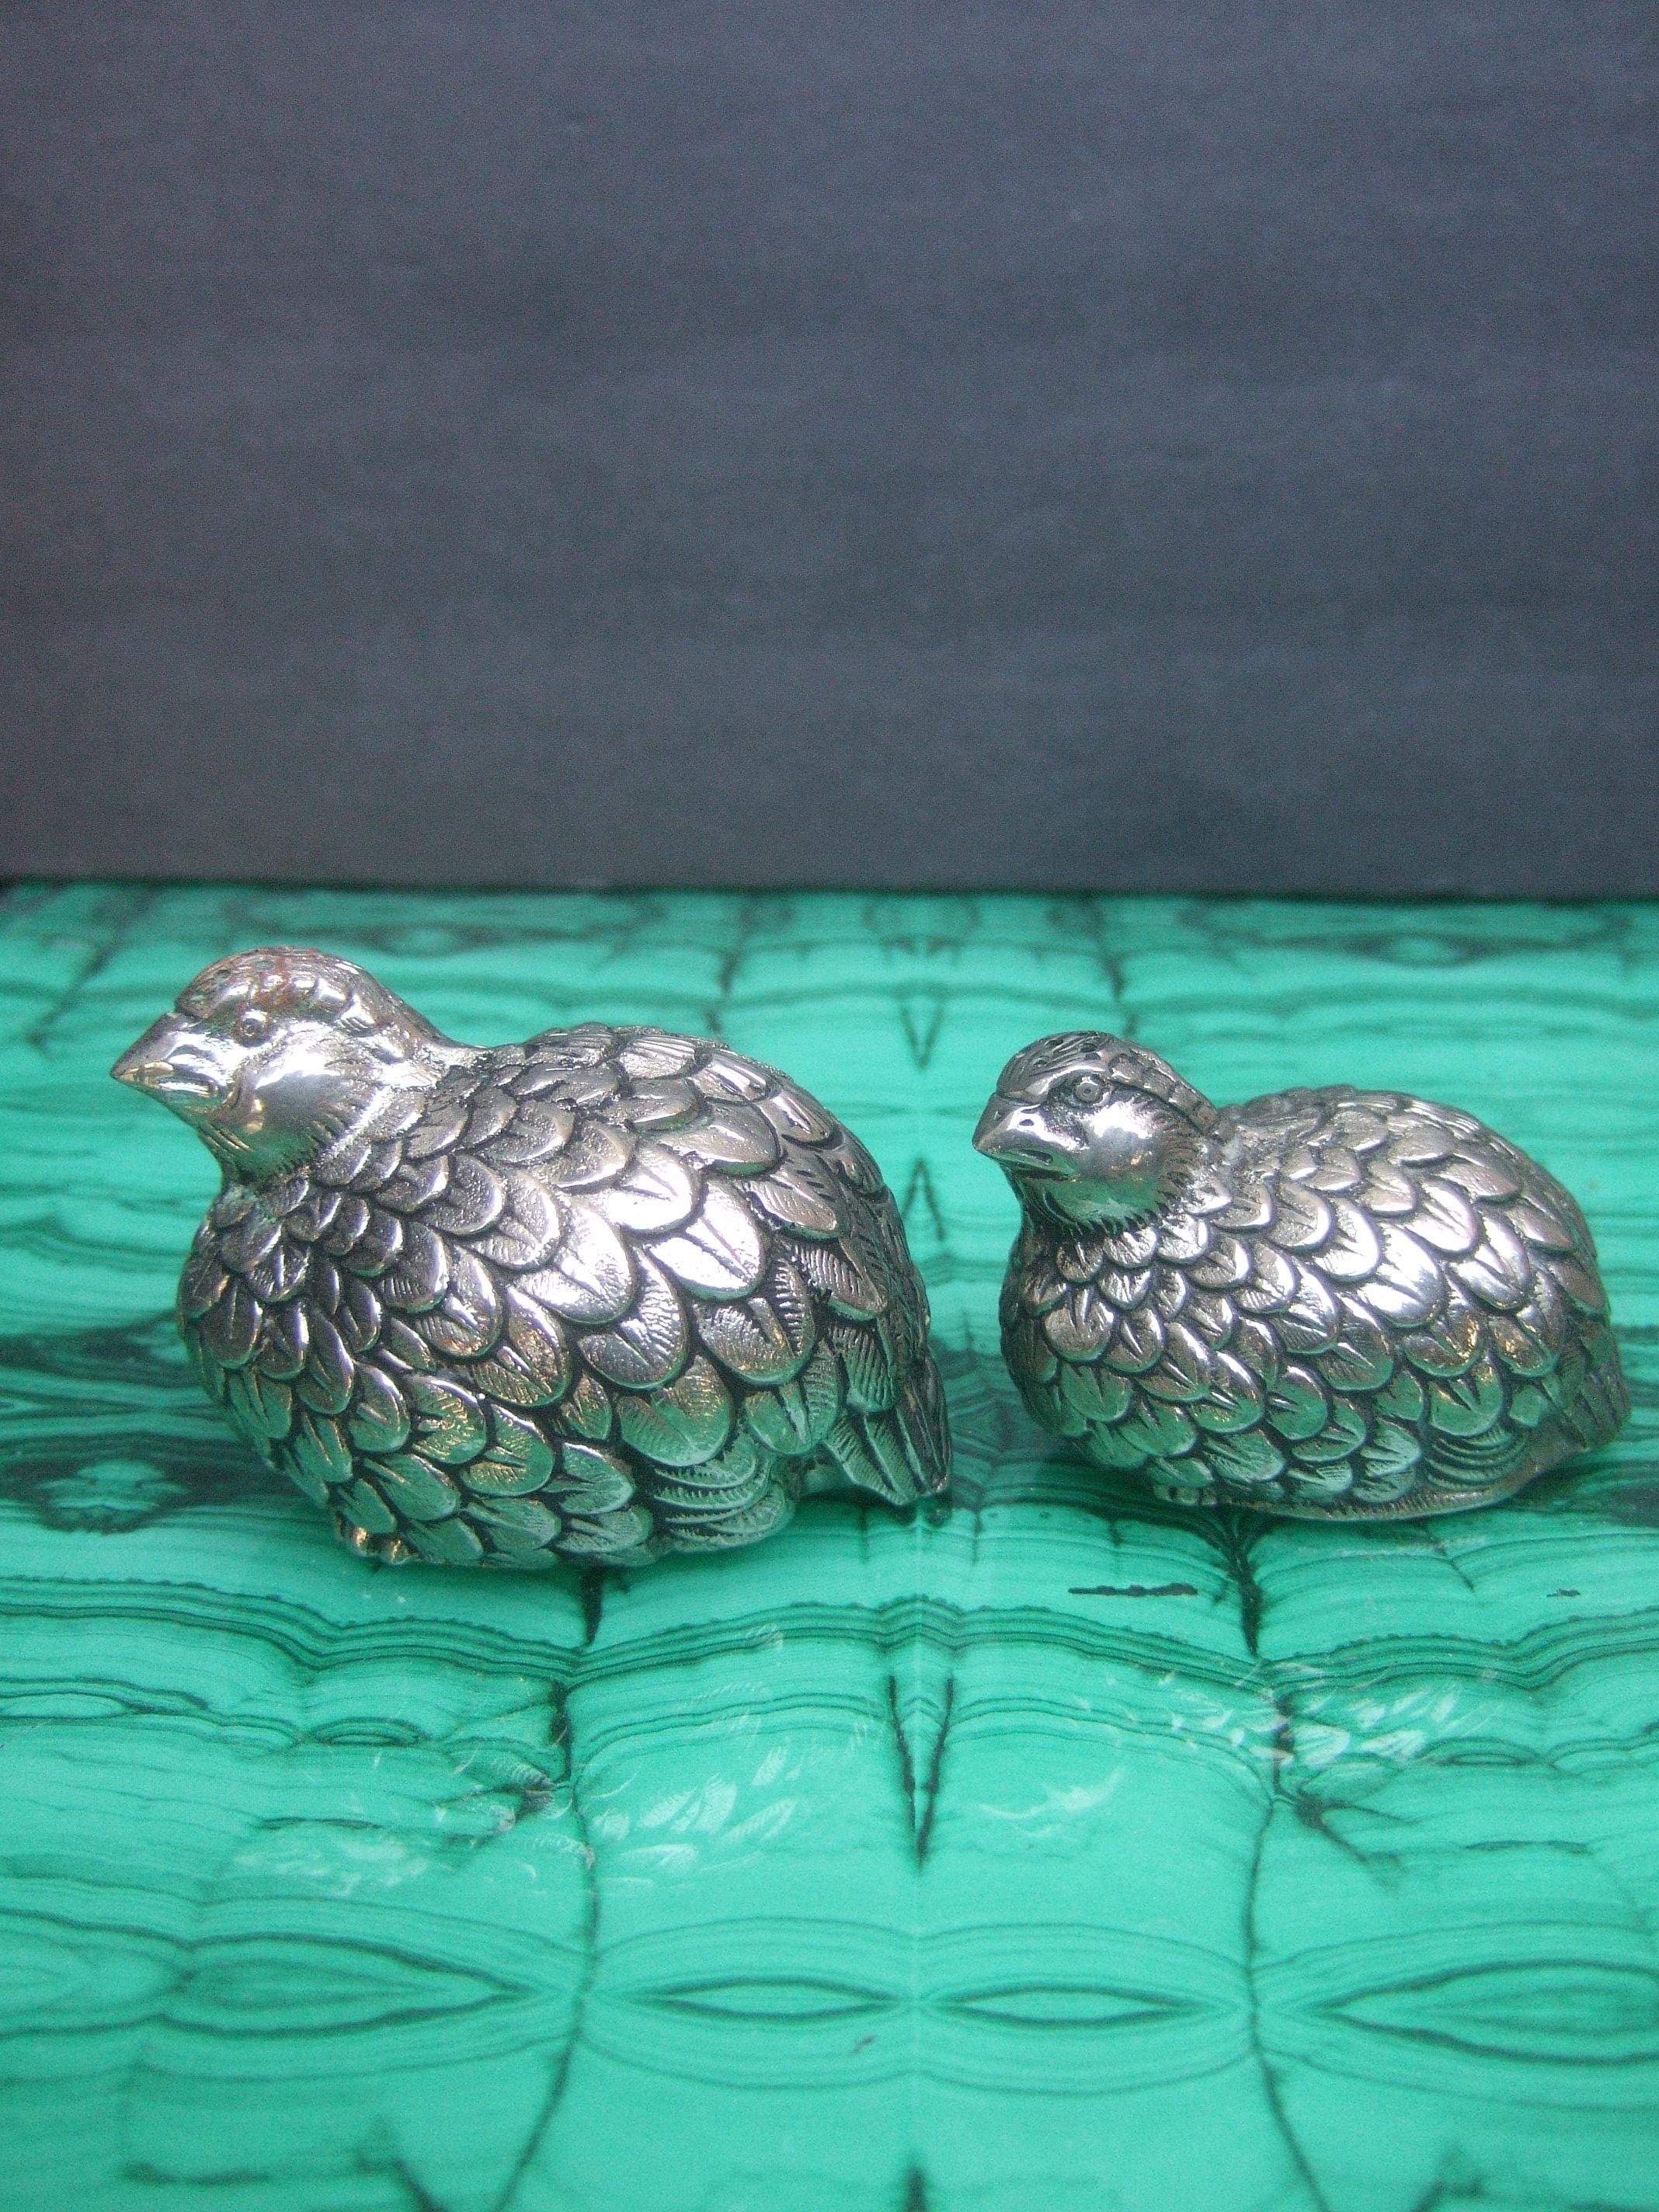 Women's or Men's Gucci Pair of Silver Metal Stylized Quail Salt & Pepper Shakers c 1970s